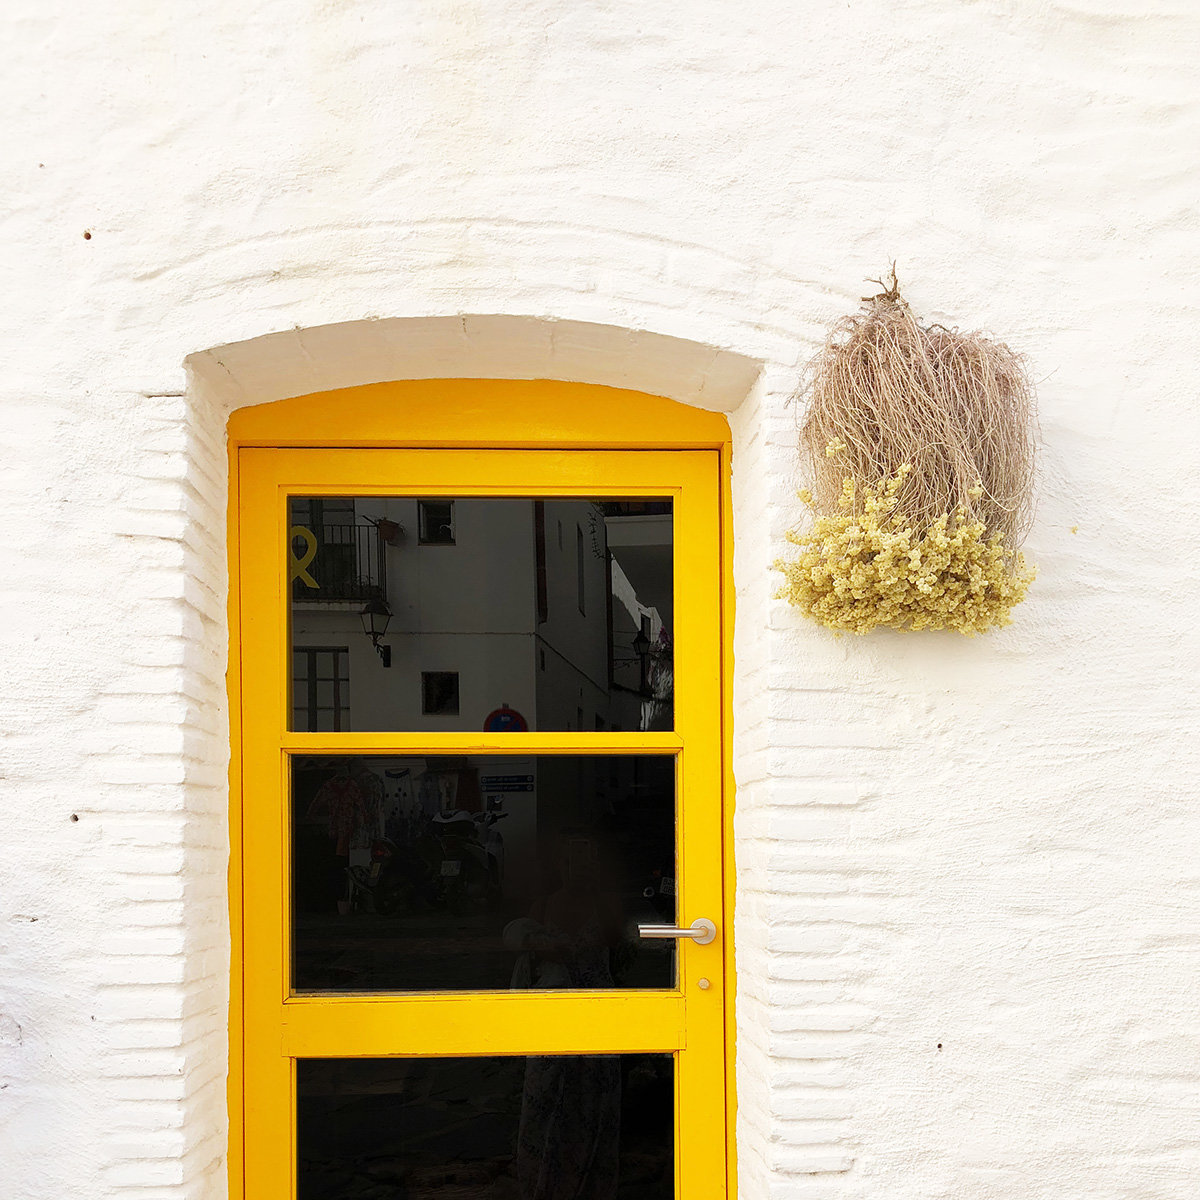 A large yellow door on a white brink building